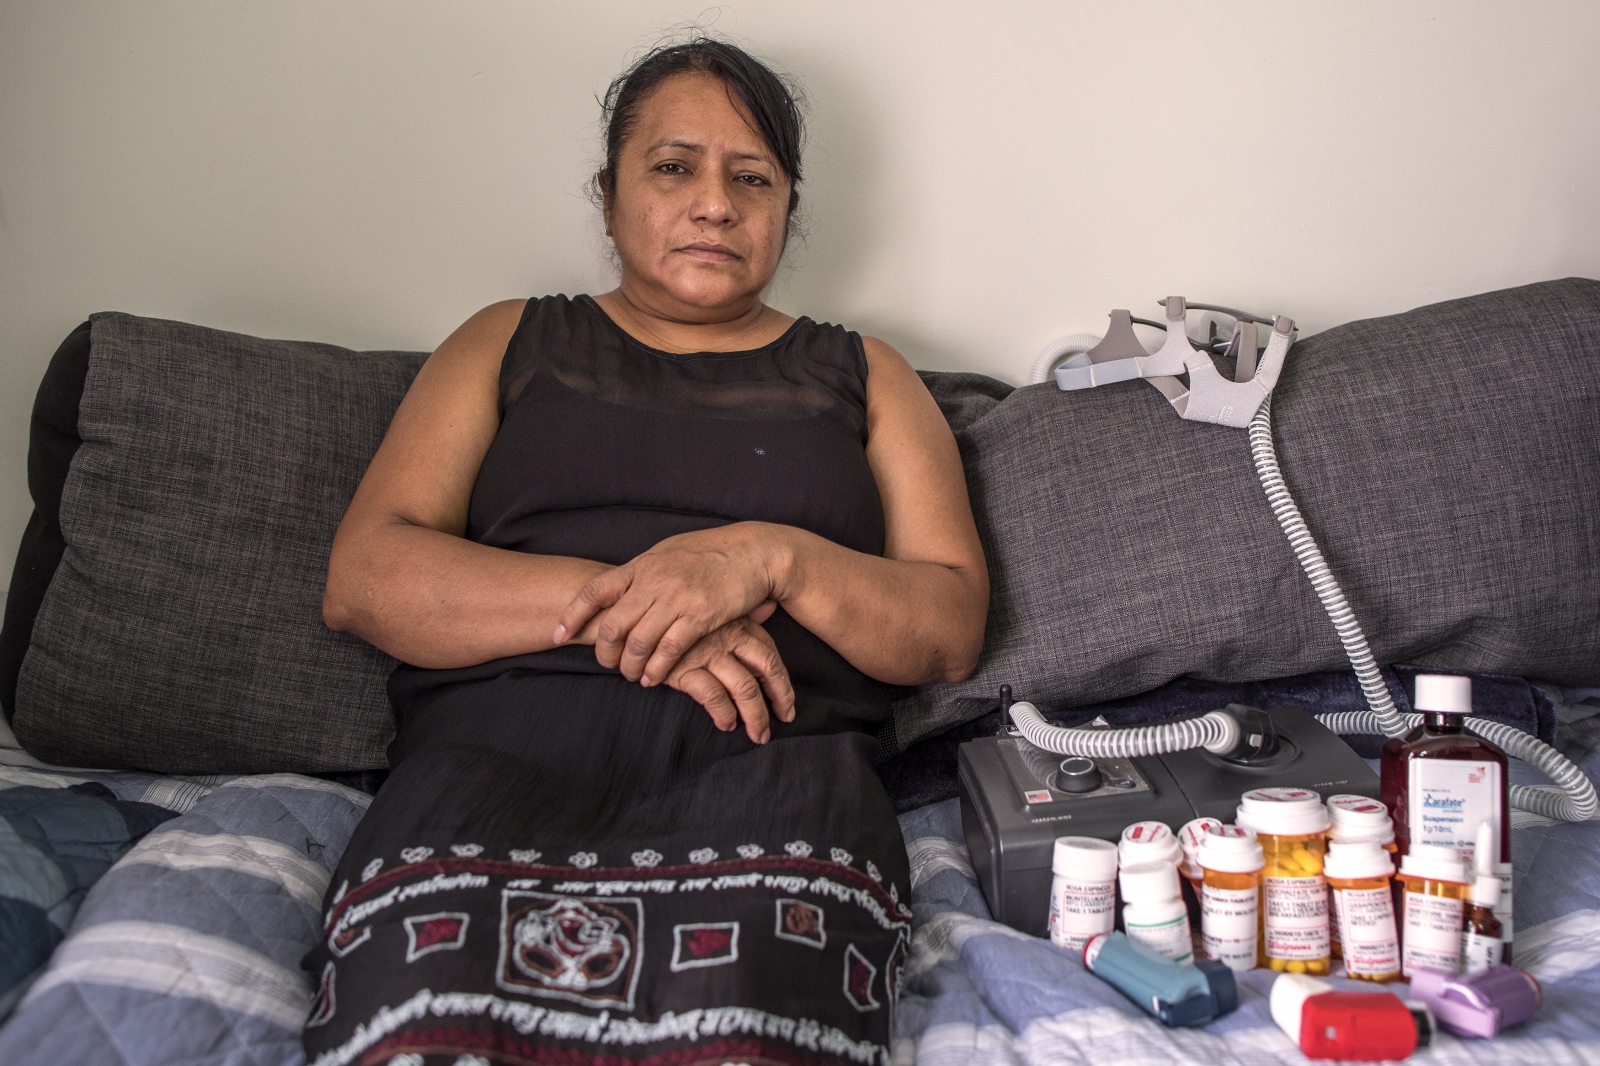  Rosa Espinosa, 53, Ecuadorean. She volunteered for four months at the World Trade Center and has cancer, asthma, sinusitis, reflux and urinary incontinence. &quot;I wish I could go to Ecuador and hug my children. It&#39;s not fair ... I never charged for the work.&quot; (All photos by Maite H. Mateo) 